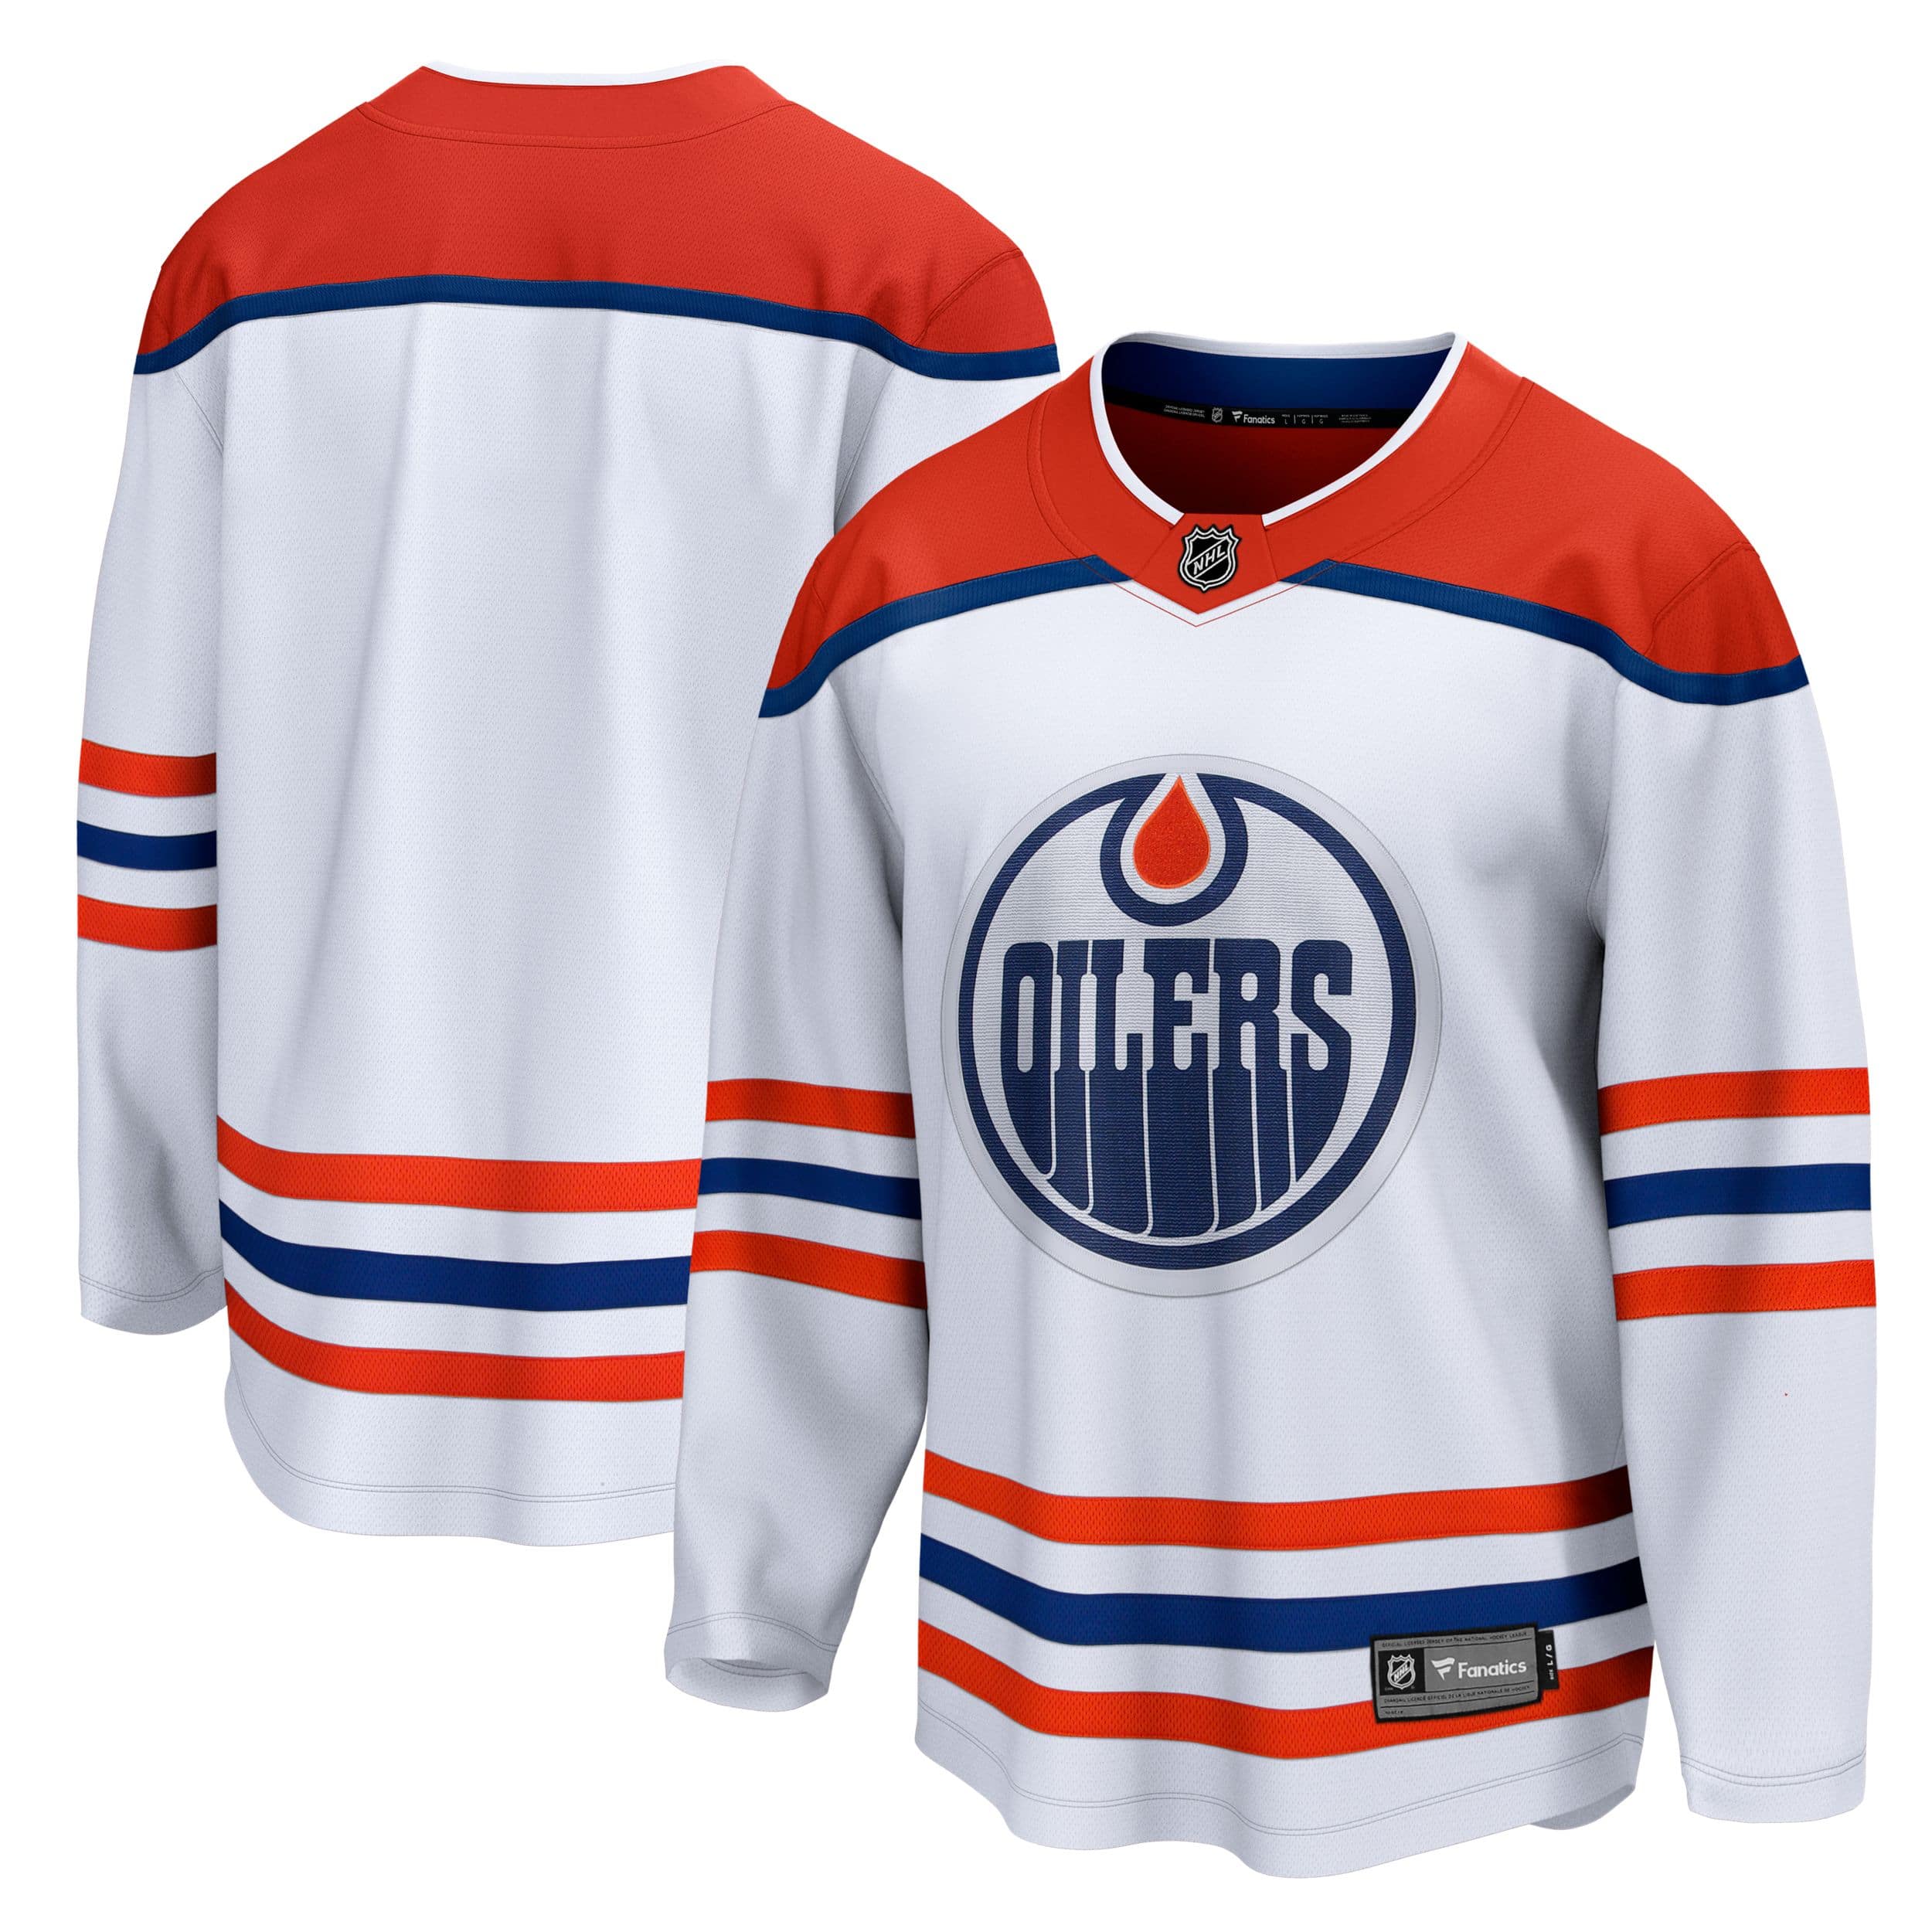 Oilers Daily on X: The Oilers Reverse Retro jerseys for the